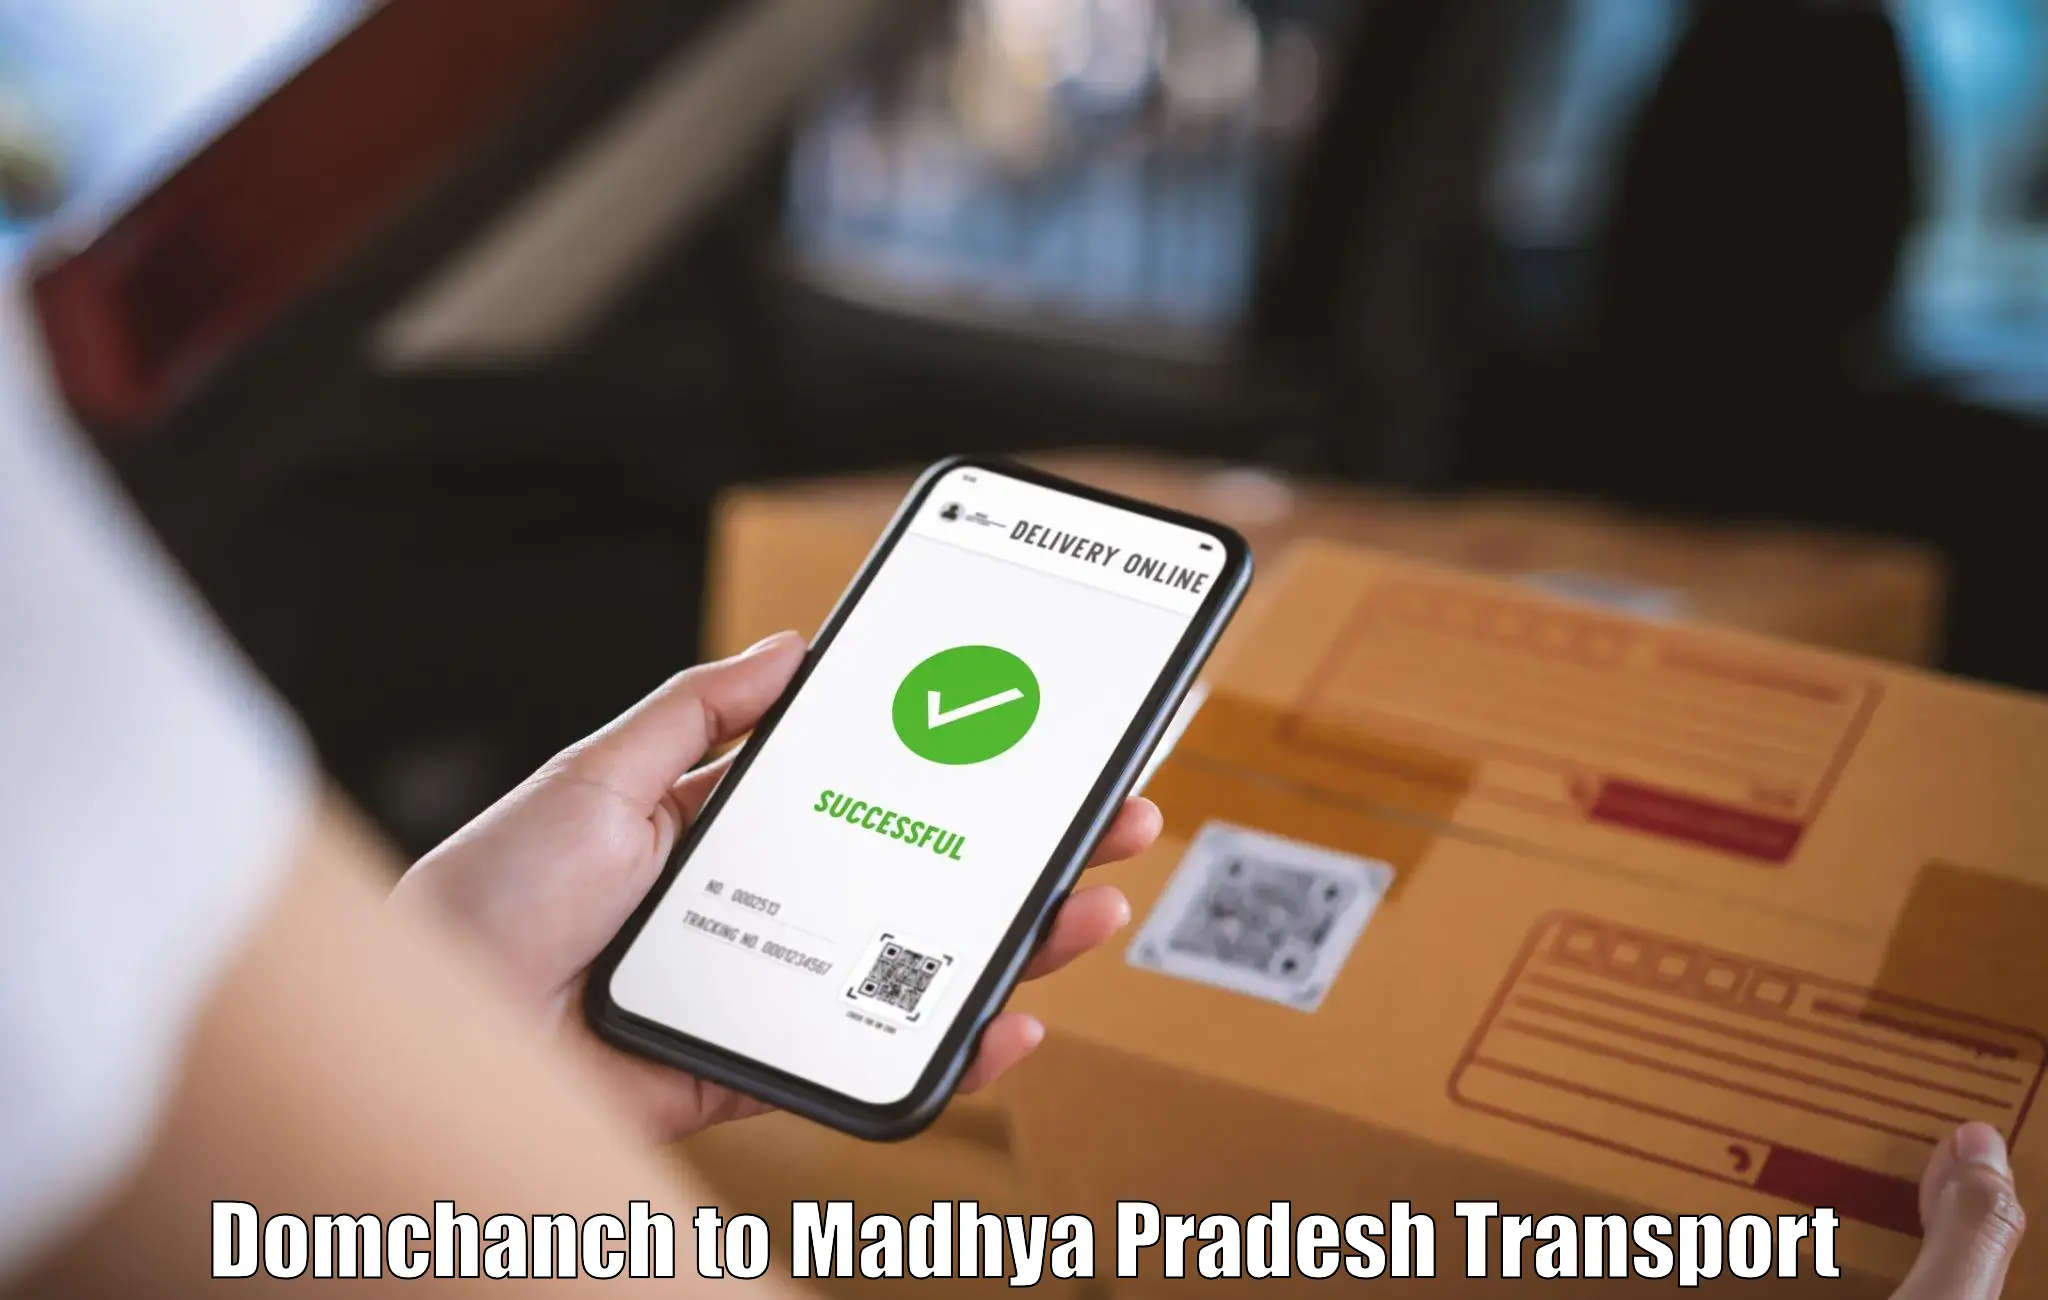 Shipping services Domchanch to Amarkantak